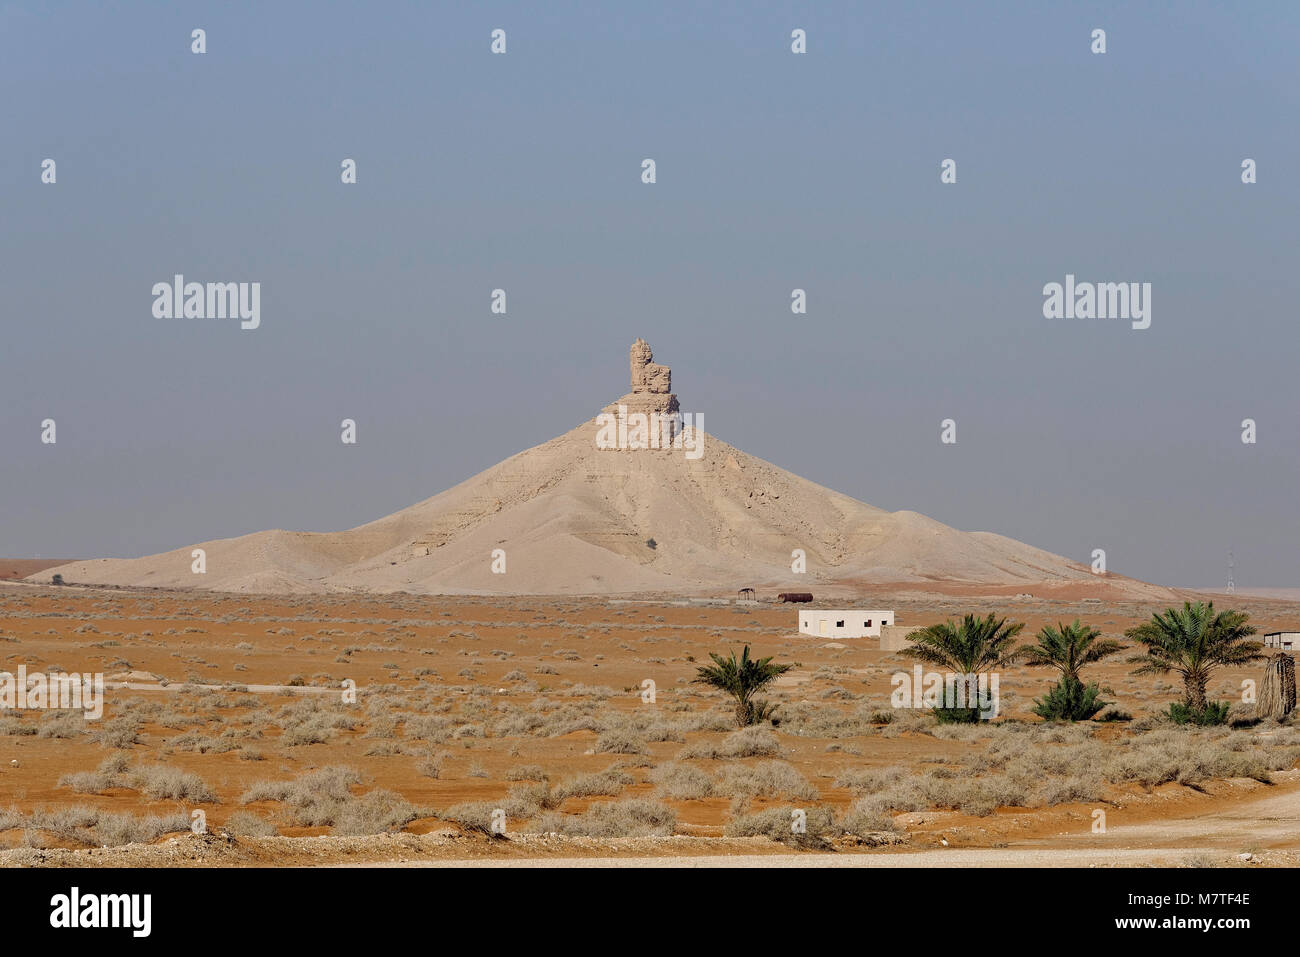 Desert butte with abandoned house and Date Palms in the Beasha Valley south of Riyadh, Saudi Arabia. Stock Photo